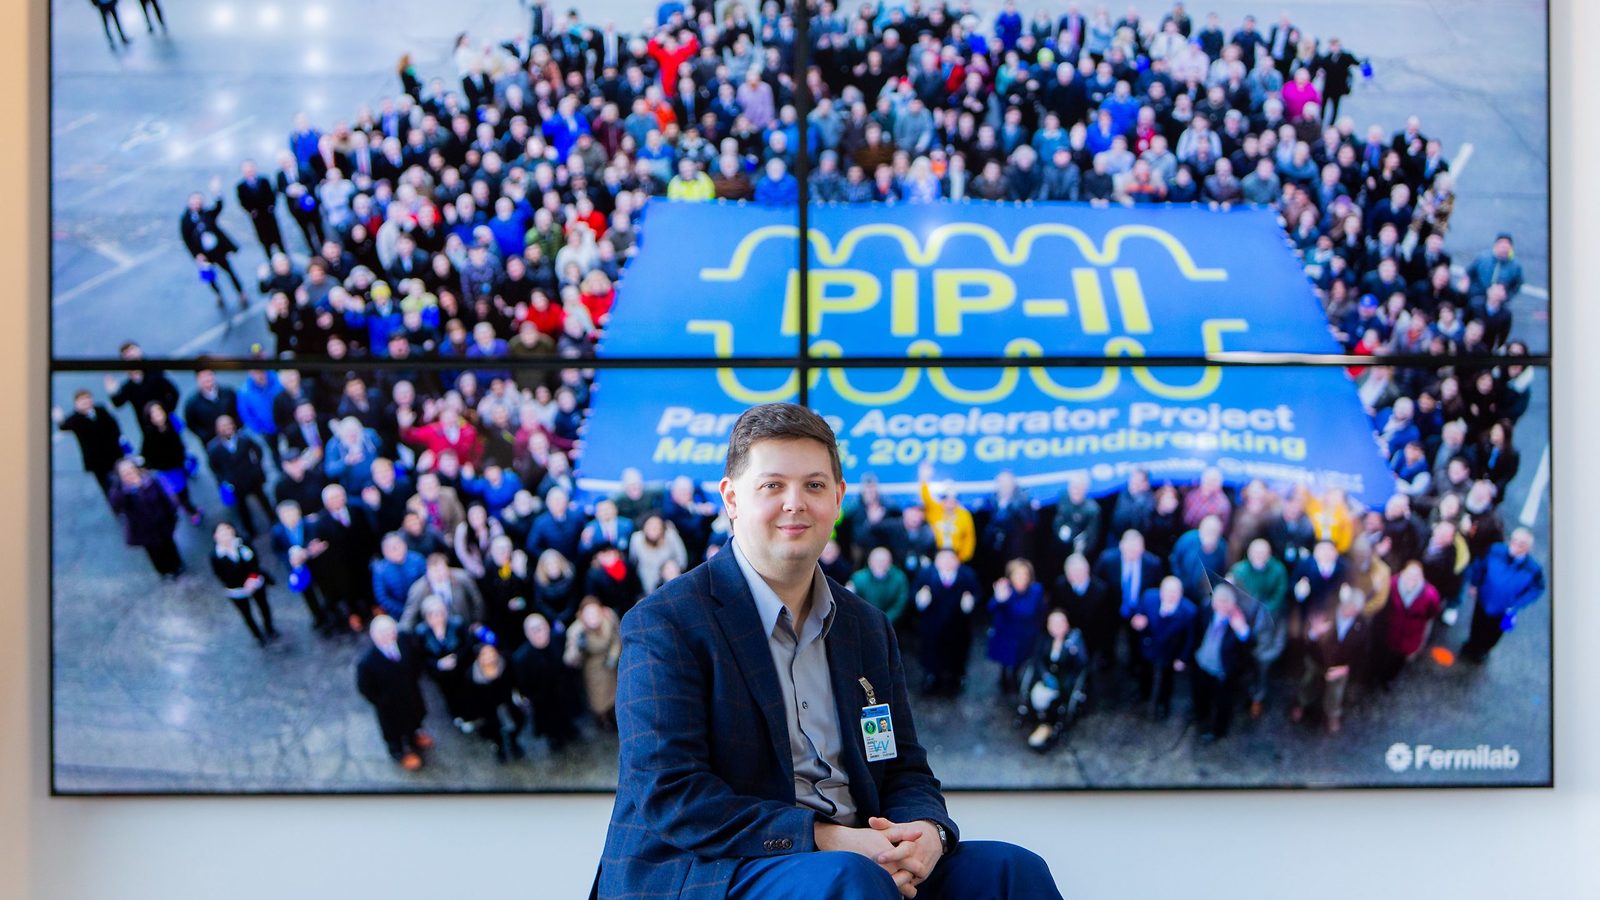 David Ibbett in front of a PIP-II background